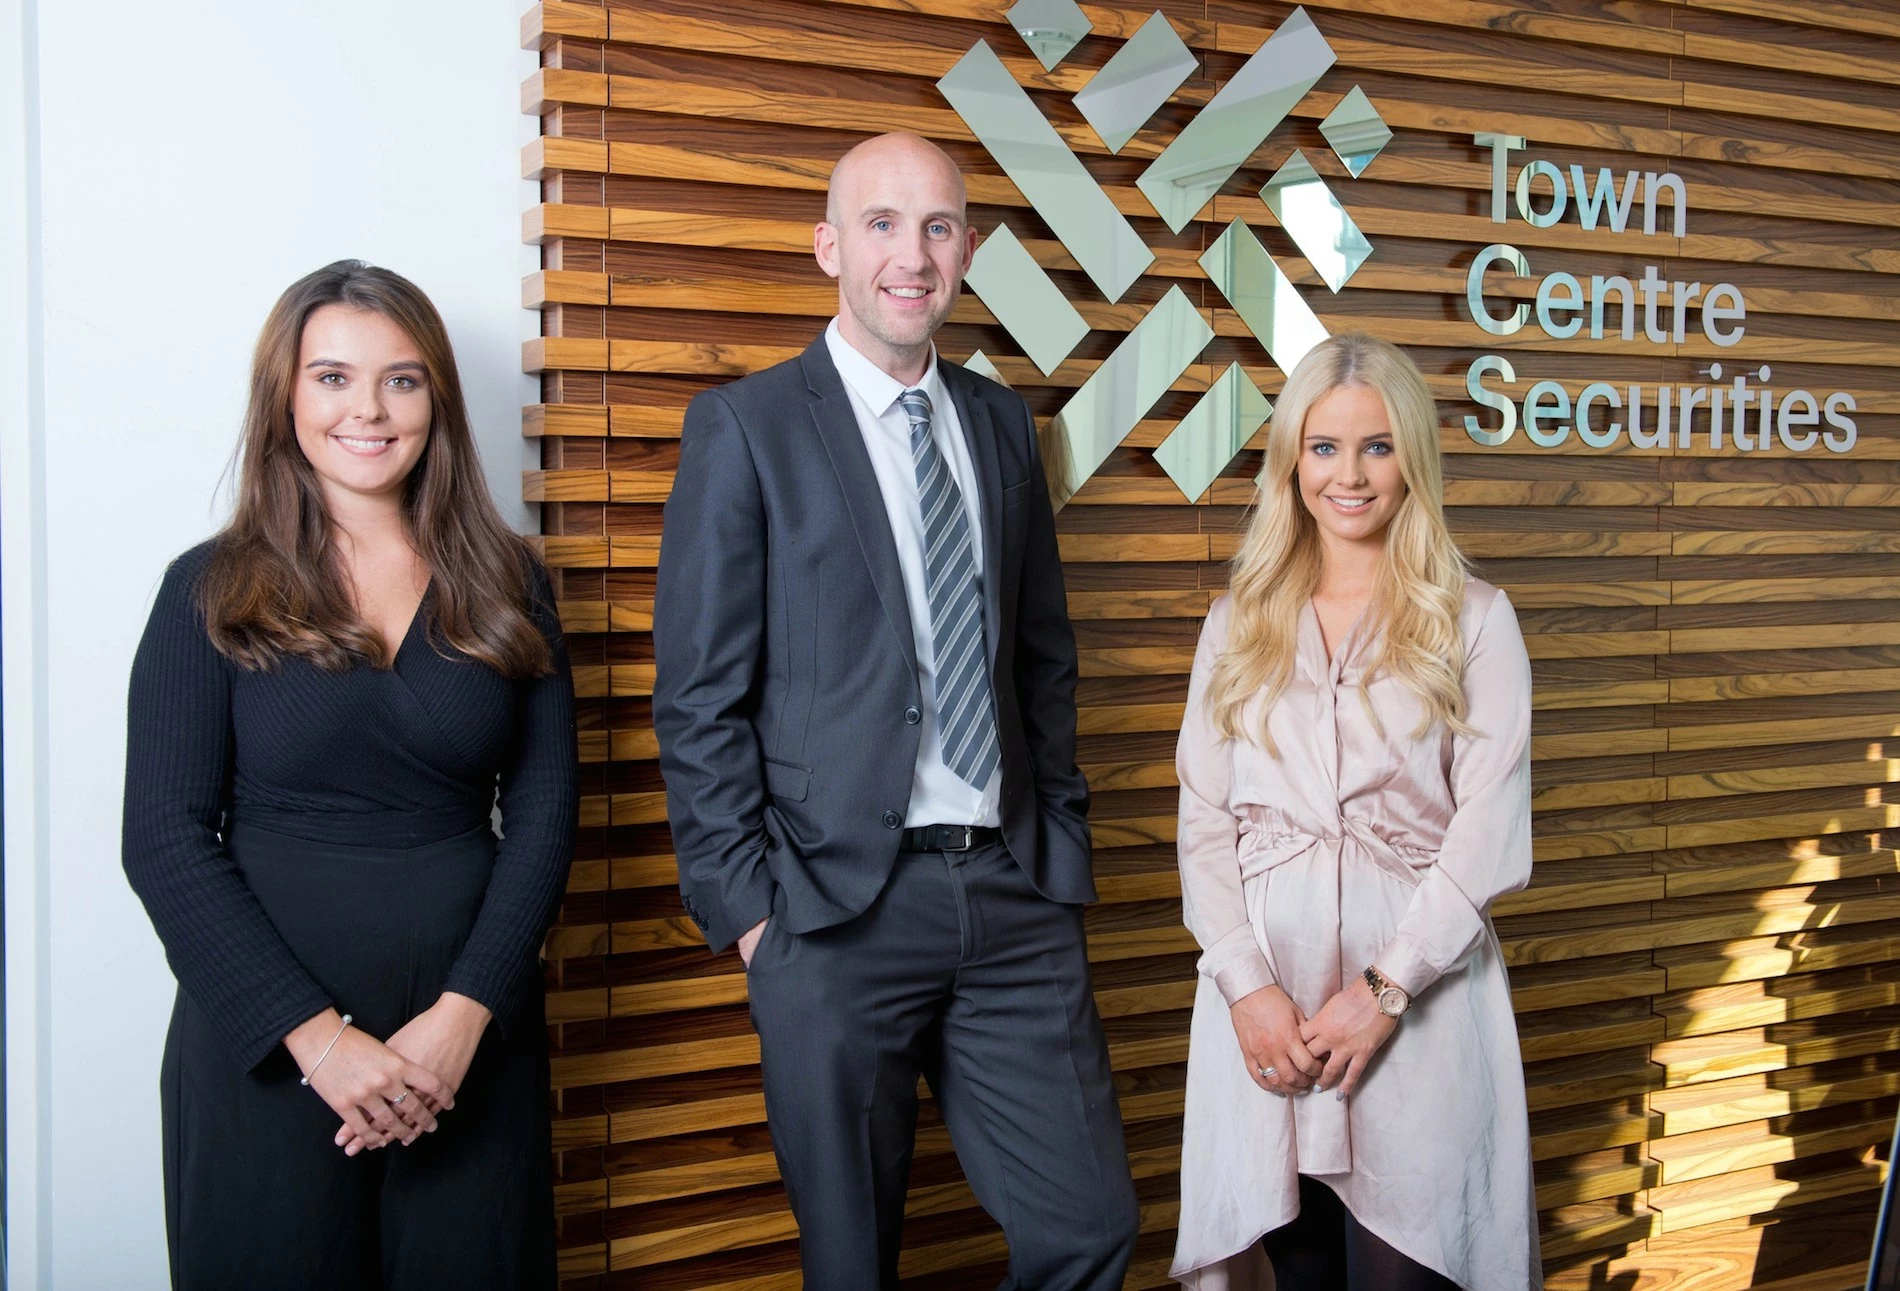 Town Centre Securities' new marketing team.